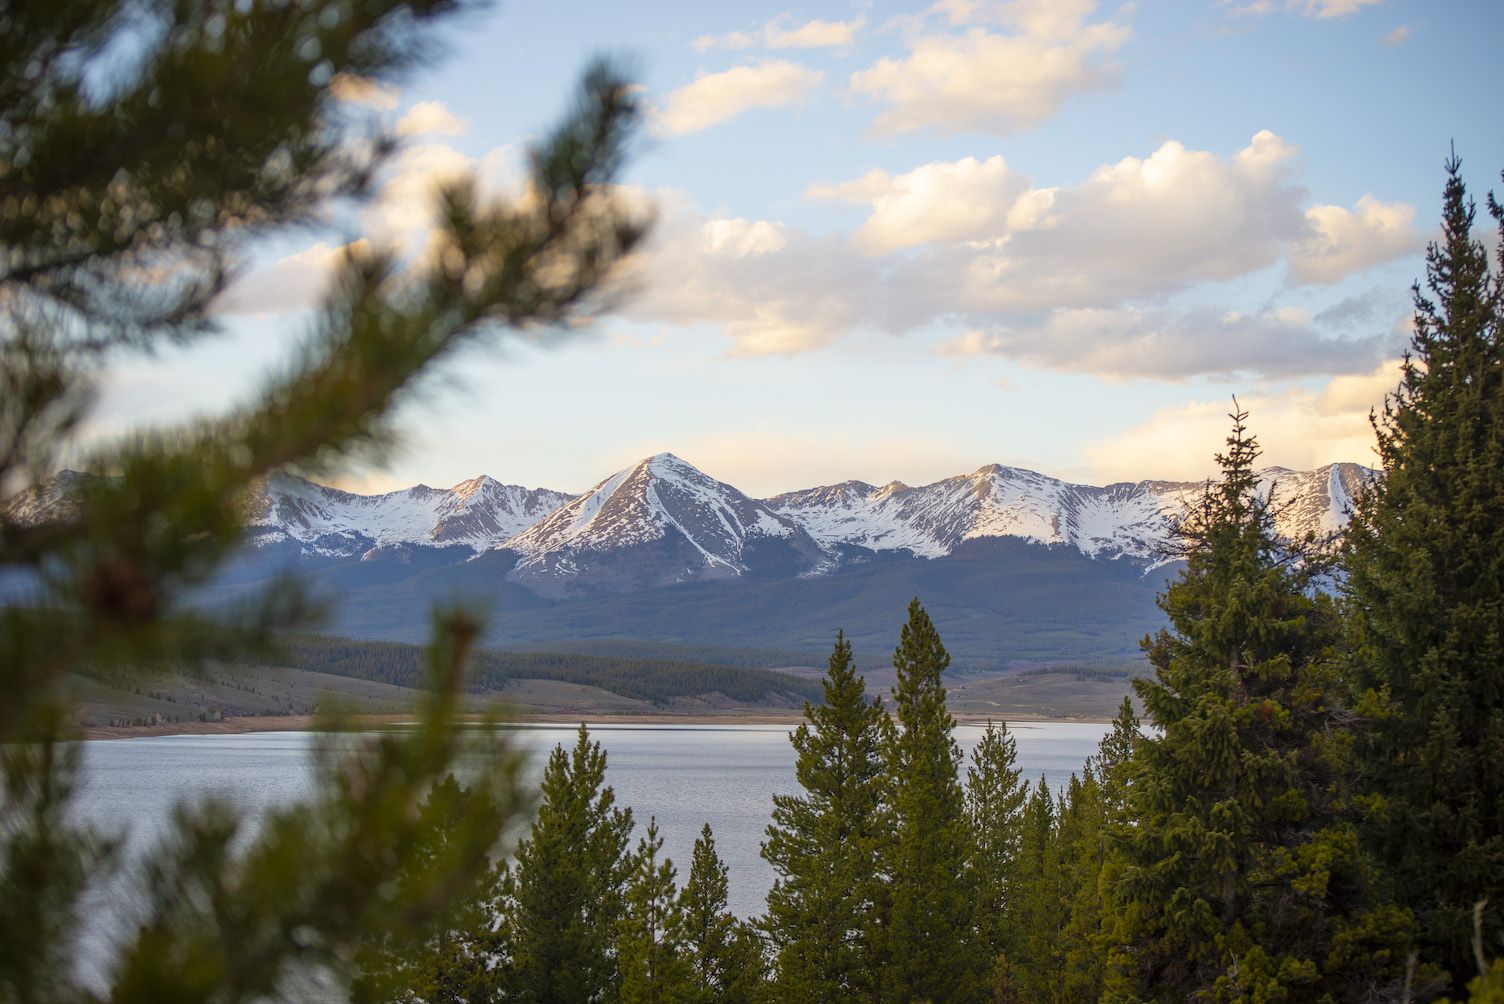 A mountain range capped in snow with trees in the foreground. A Taylor Park Reservoir spring sunset